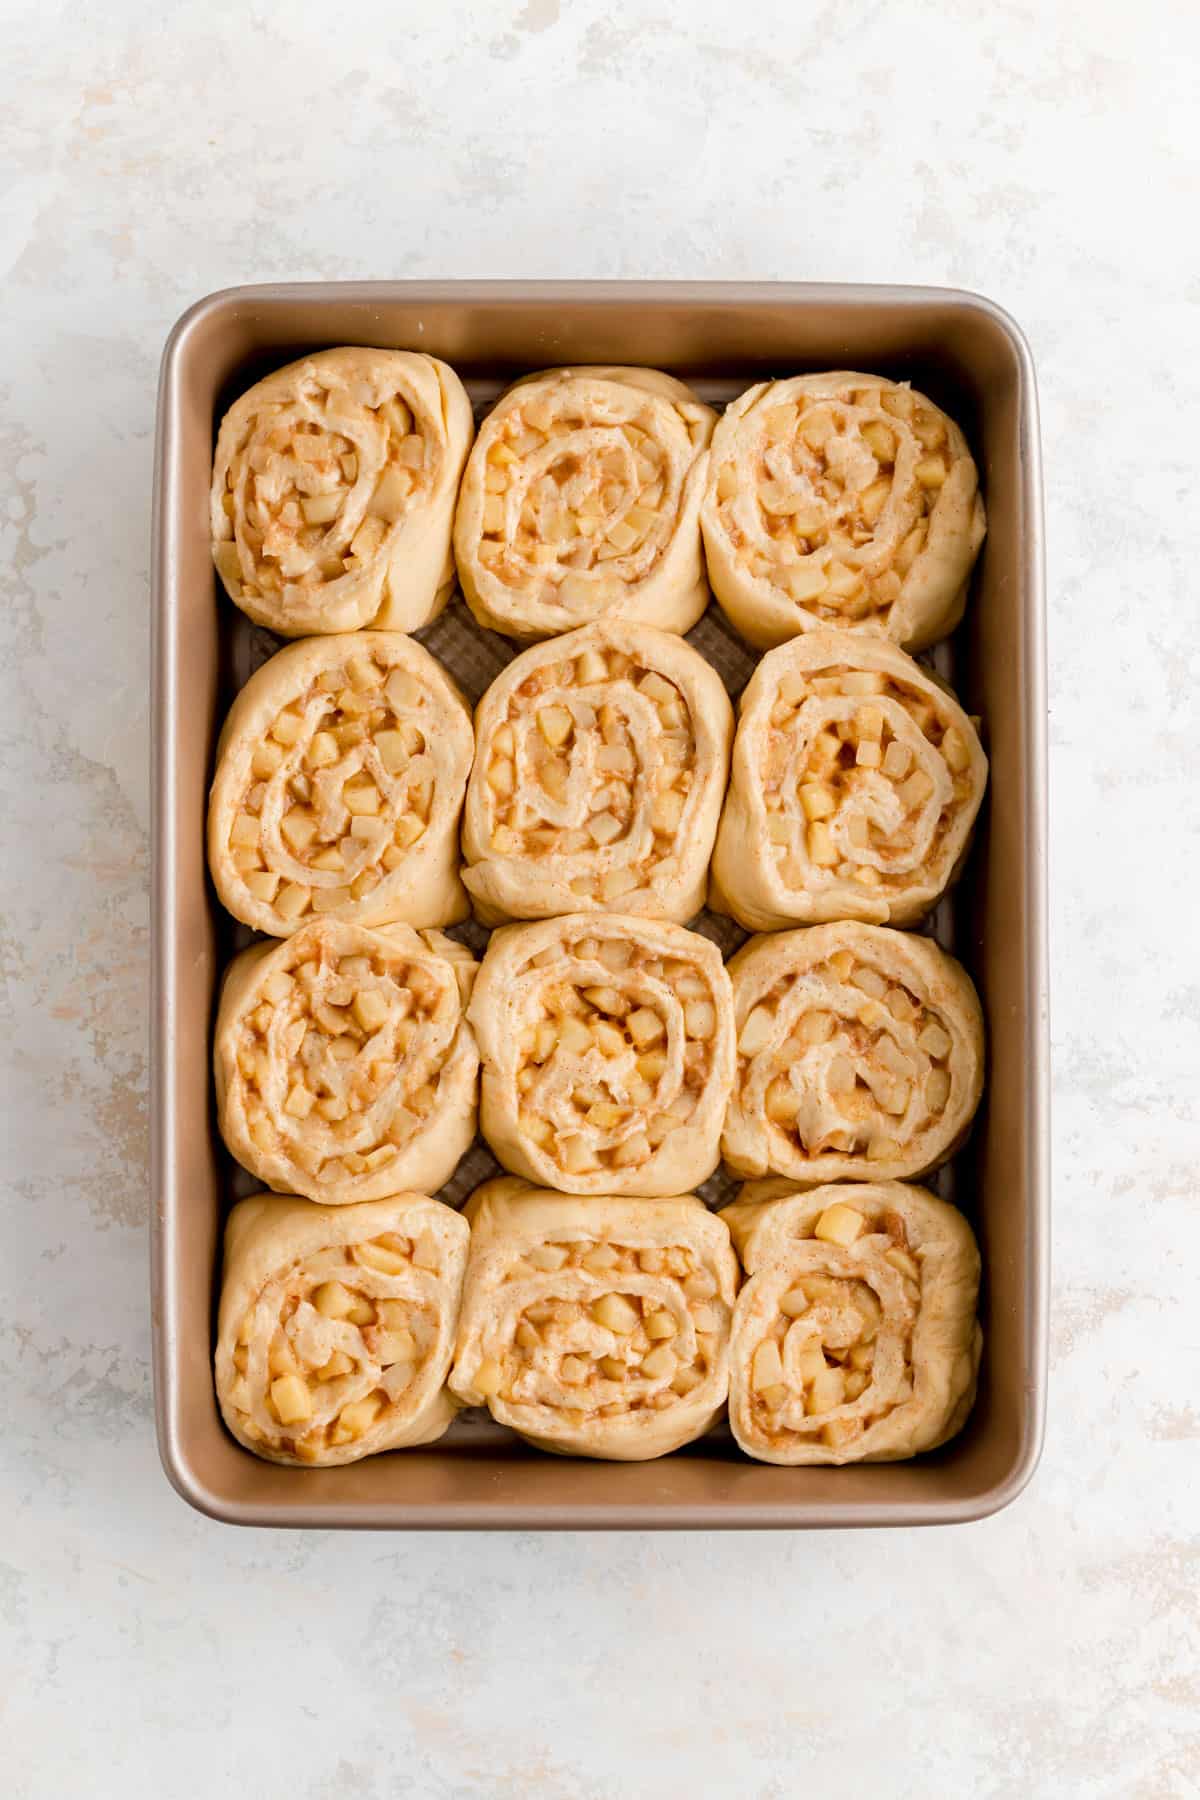 sliced cinnamon rolls with apple pie filling arranged in a 9 by 13 inch pan.